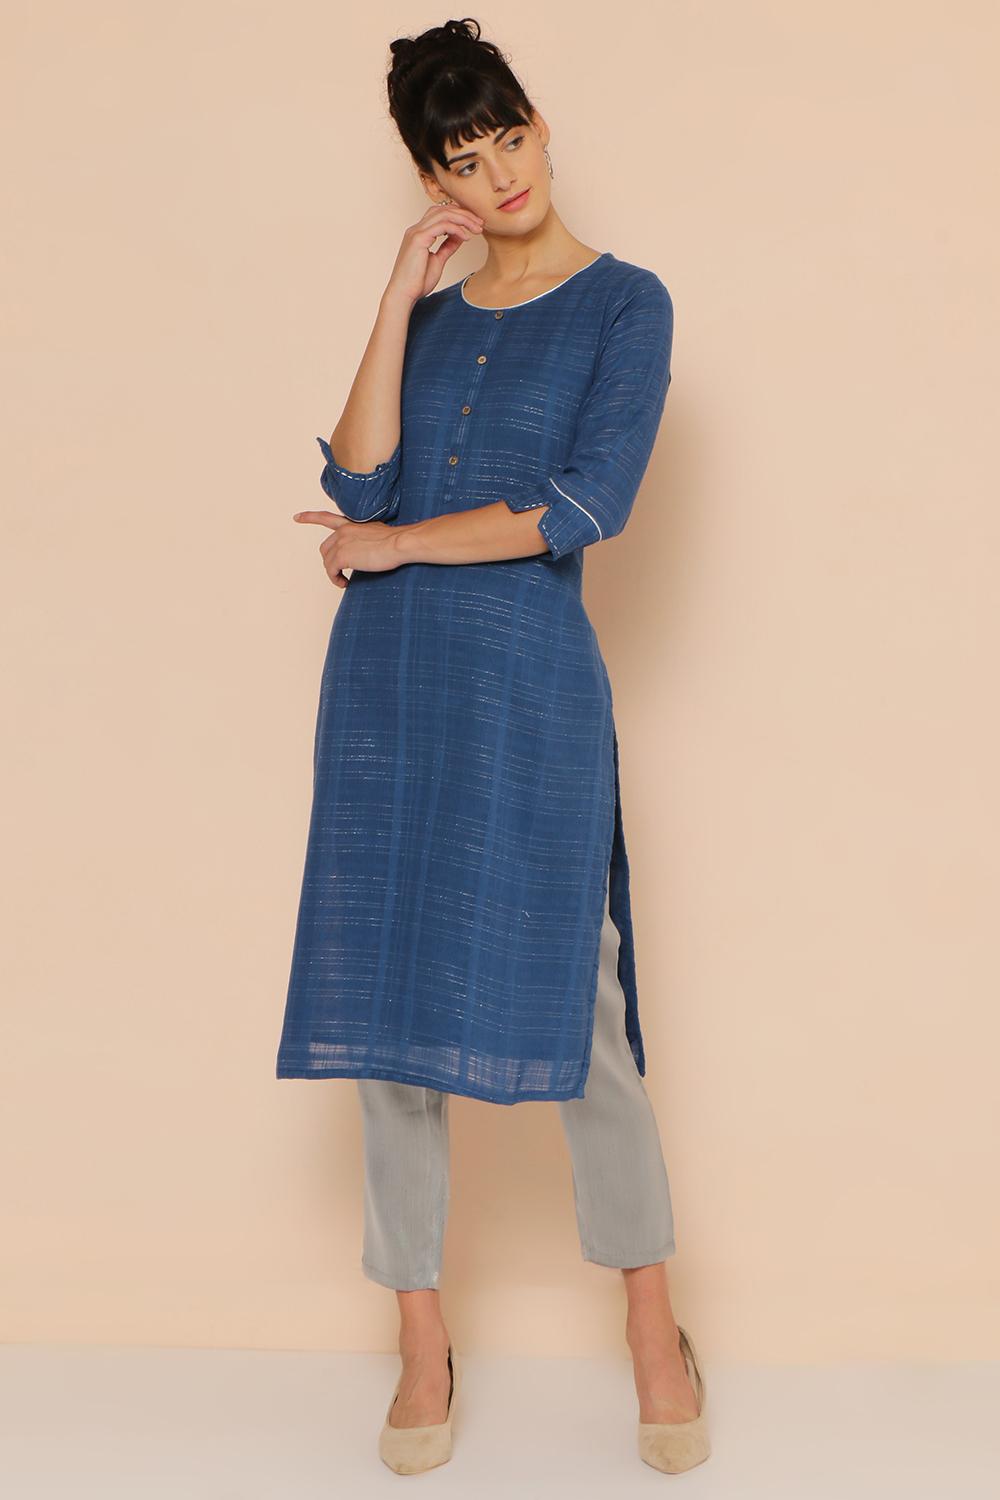 Buy Online Royal Blue Cotton Straight Kurta for Women at Best Price at